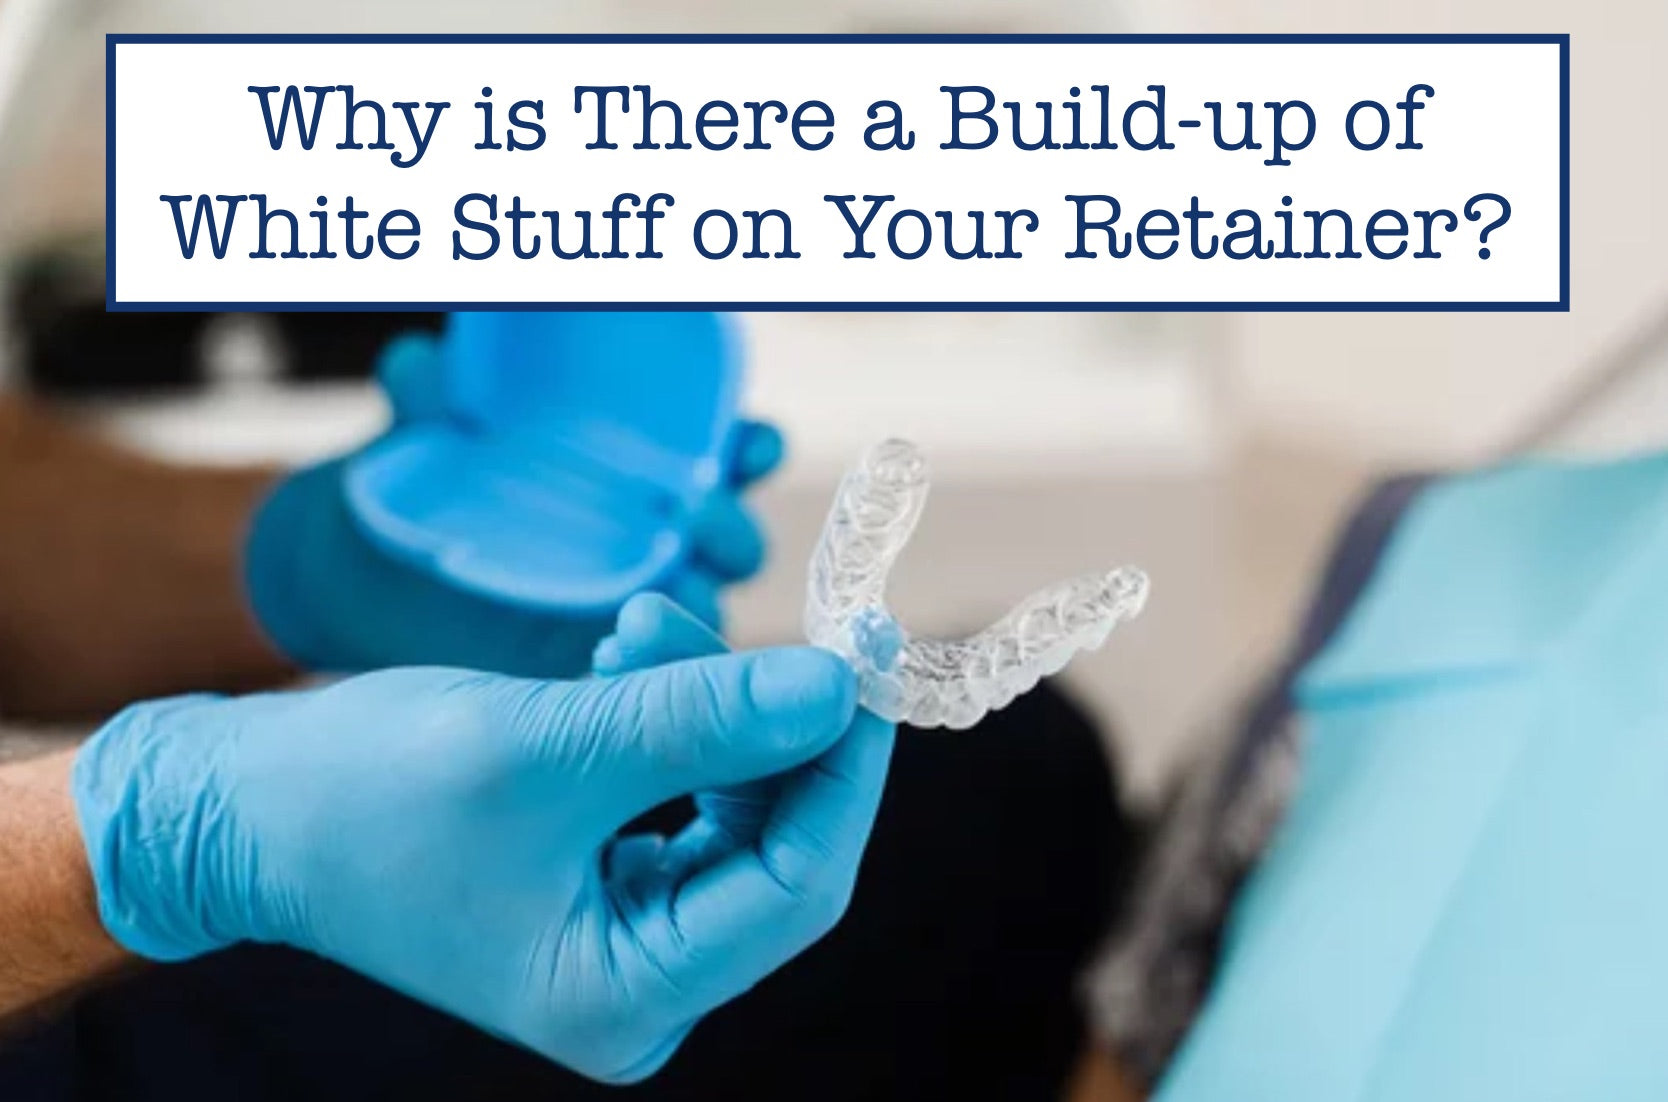 Why is There a Build-up of White Stuff on Your Retainer?